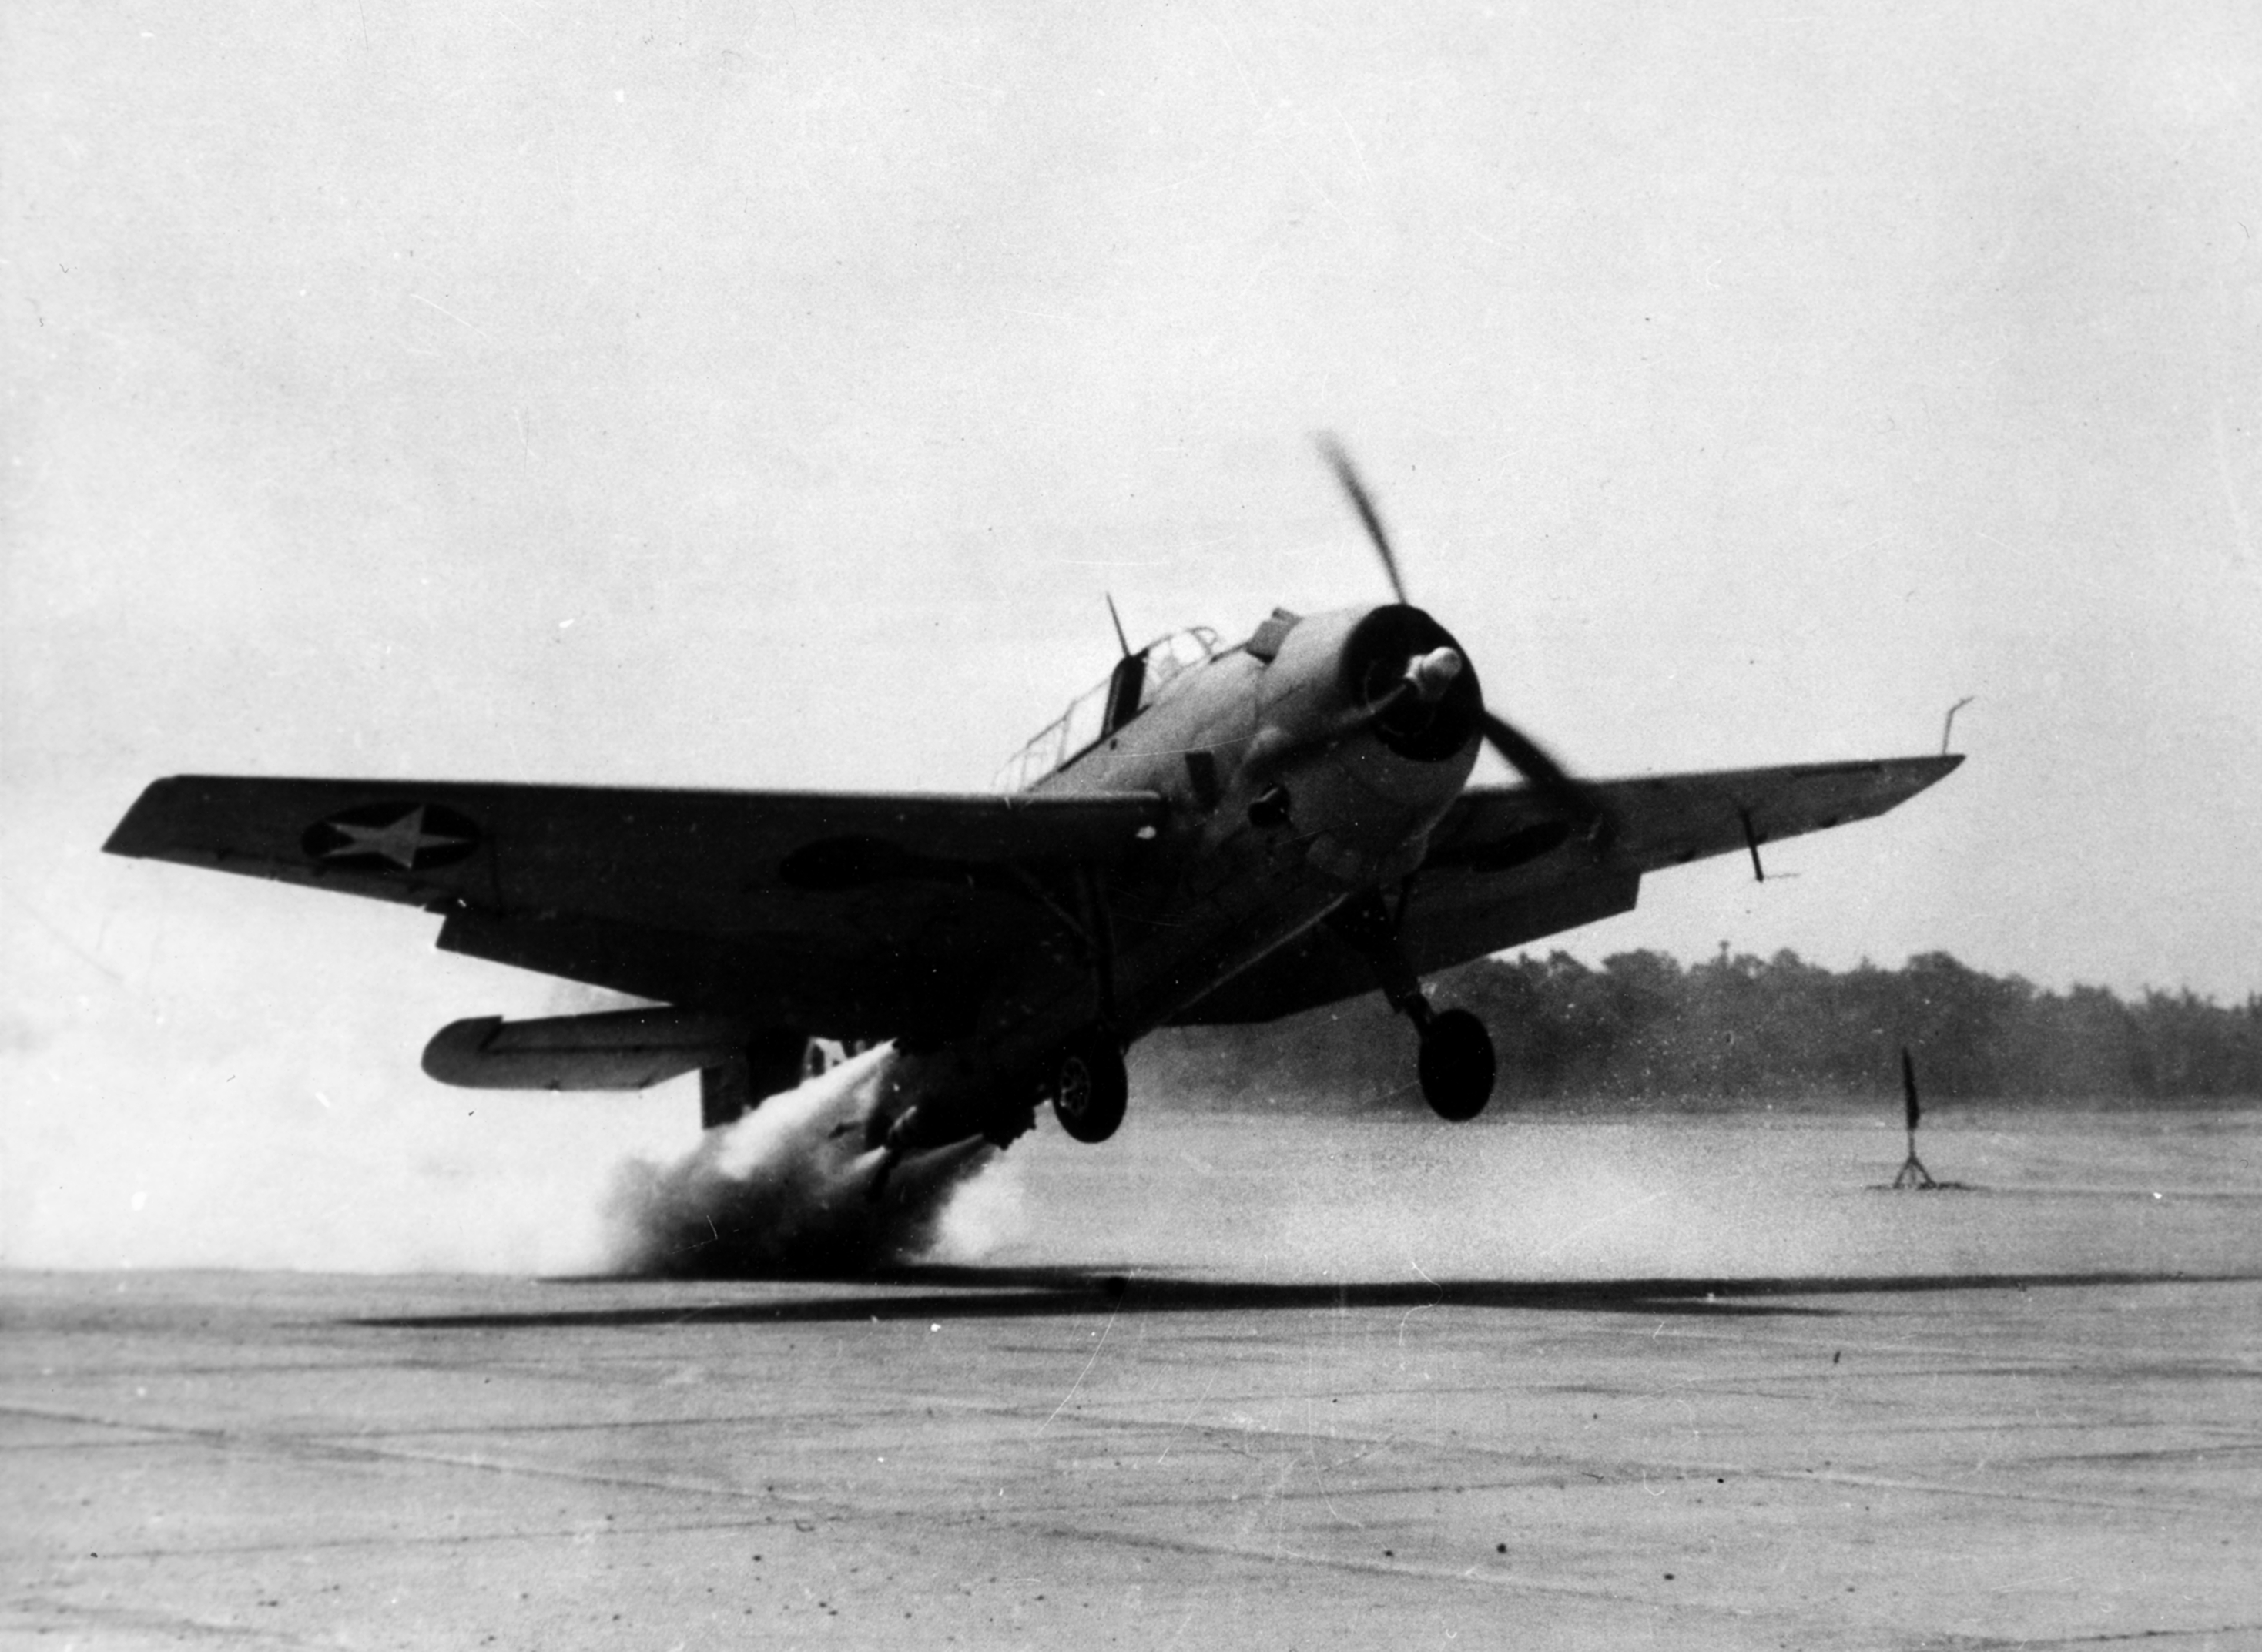 File:Rocket-assisted take-off of TBF c1943.jpg - Wikimedia Commons